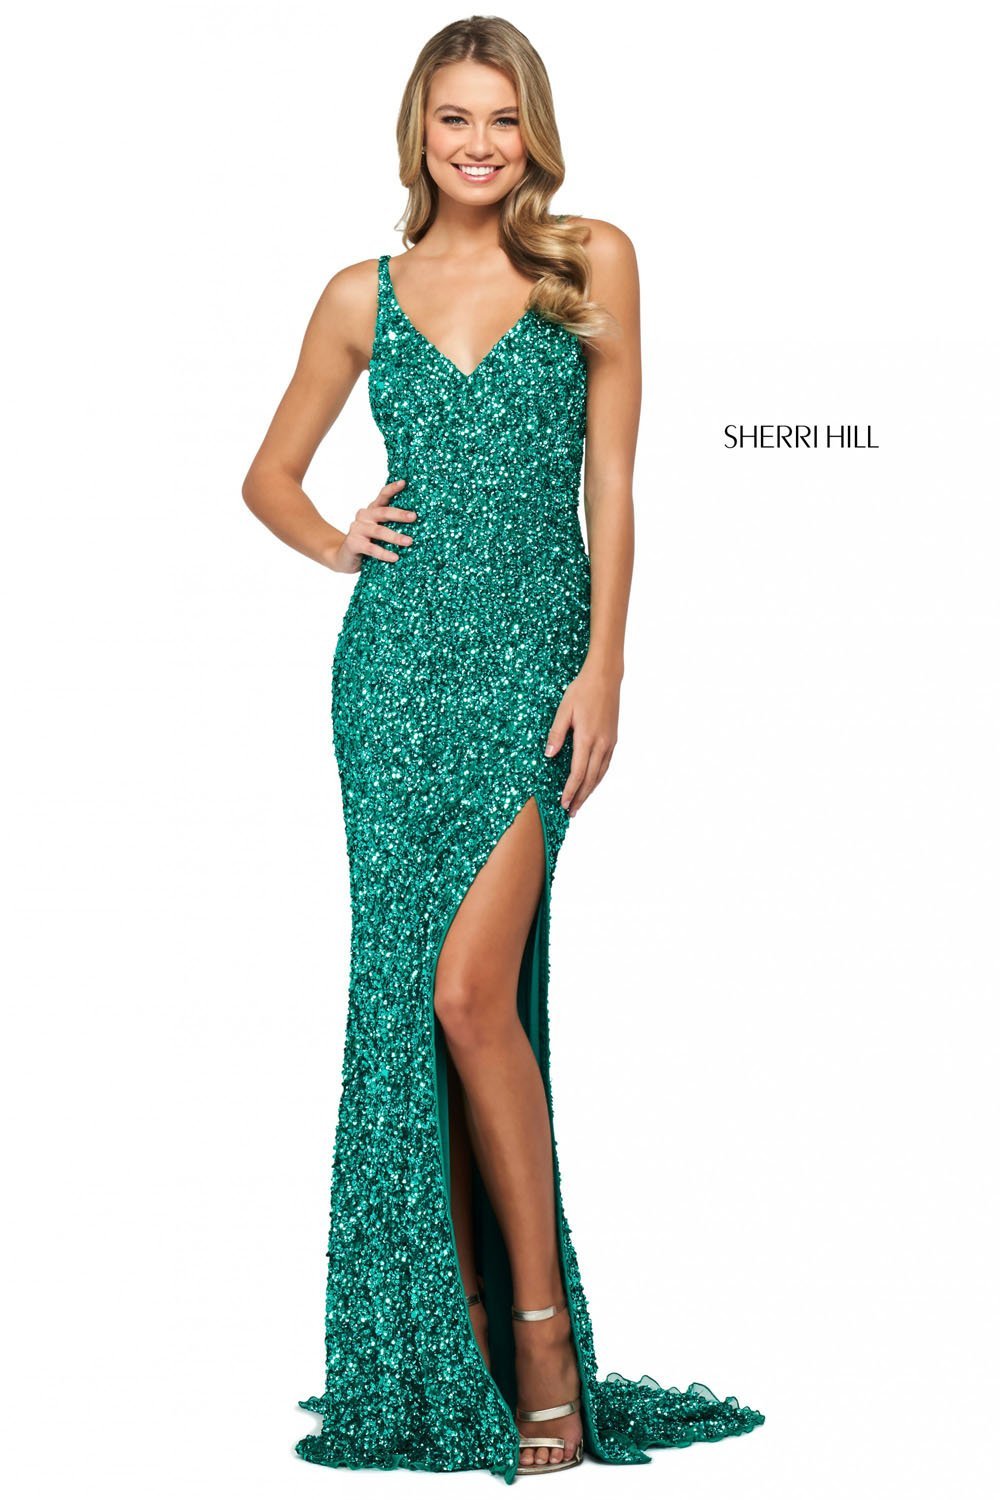 Sherri Hill 53450 dress images in these colors: Light Blue, Aqua, Gold, Light Pink, Silver, Rose Gold, Light Yellow, Lilac, Burgundy, Navy, Black, Red, Emerald, Royal.